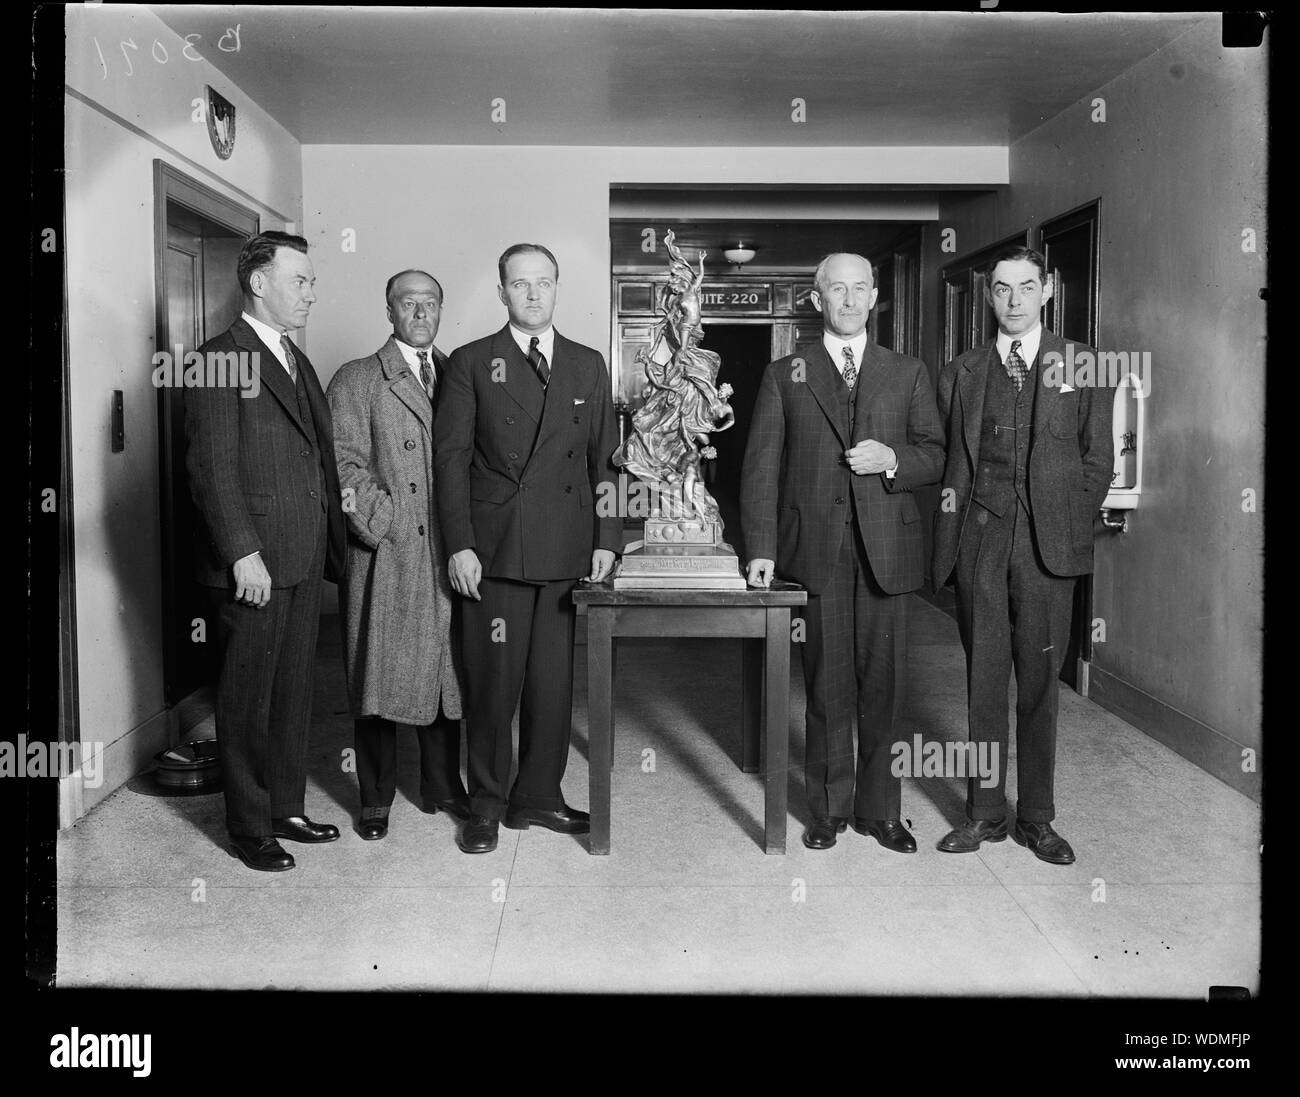 Gordon Bennett International Balloon Trophy goes to U.S. Army Air Corps. The Gordon Bennett International Balloon Trophy, property of the National Aeronautic Association by virtue of three victories by American Balloonists, was today presented to Assistant Secretary of War for Aviation F. Trubee Davison for the Army Air Corps for a year by Orville Wright, secretary of the Contest Committee of the Association An Army pilot, Captain W.G. Kemper, secured the trophy for America by winning the race from Detroit last year. In the photograph, left to right: Ray Cooper, of the National Aeronautic Asso Stock Photo